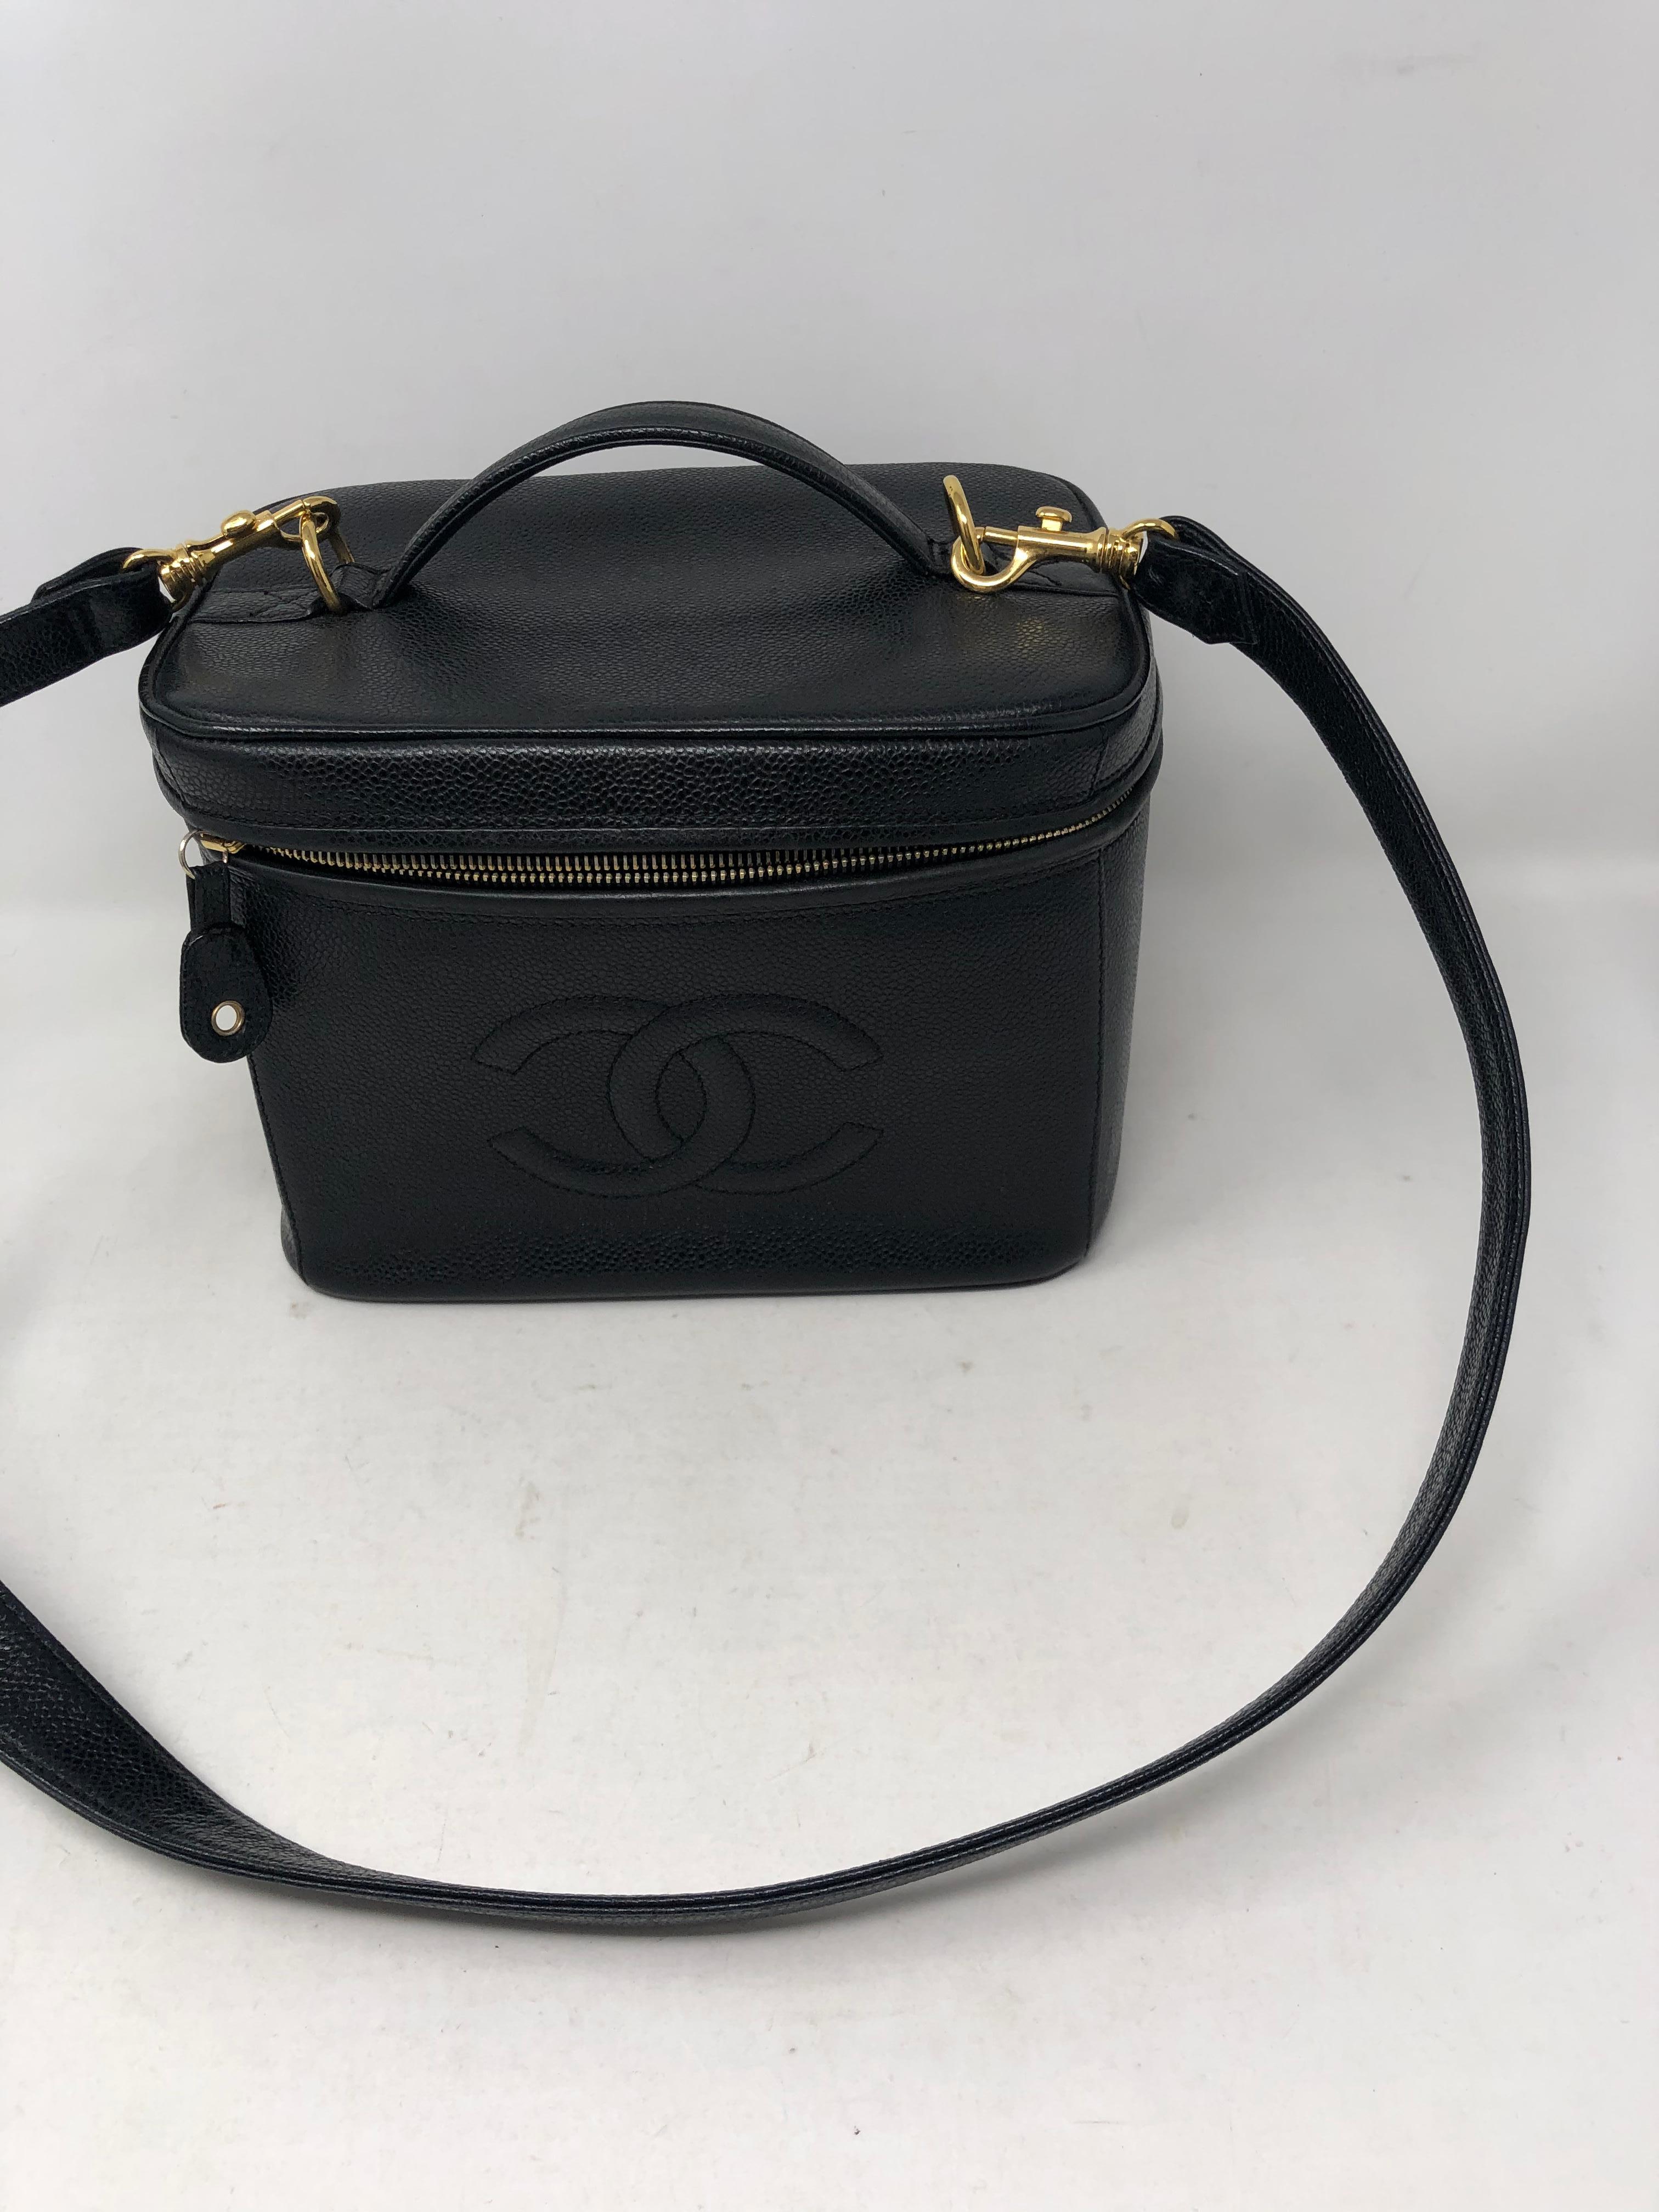 Chanel Vintage Vanity Case with Black Leather Strap. Caviar leather. Gold hardware. Excellent condition. Rare vintage piece. Includes authenticity card. Can be worn as a purse or as a crossbody bag. Don't miss out on this one. Guaranteed authentic. 